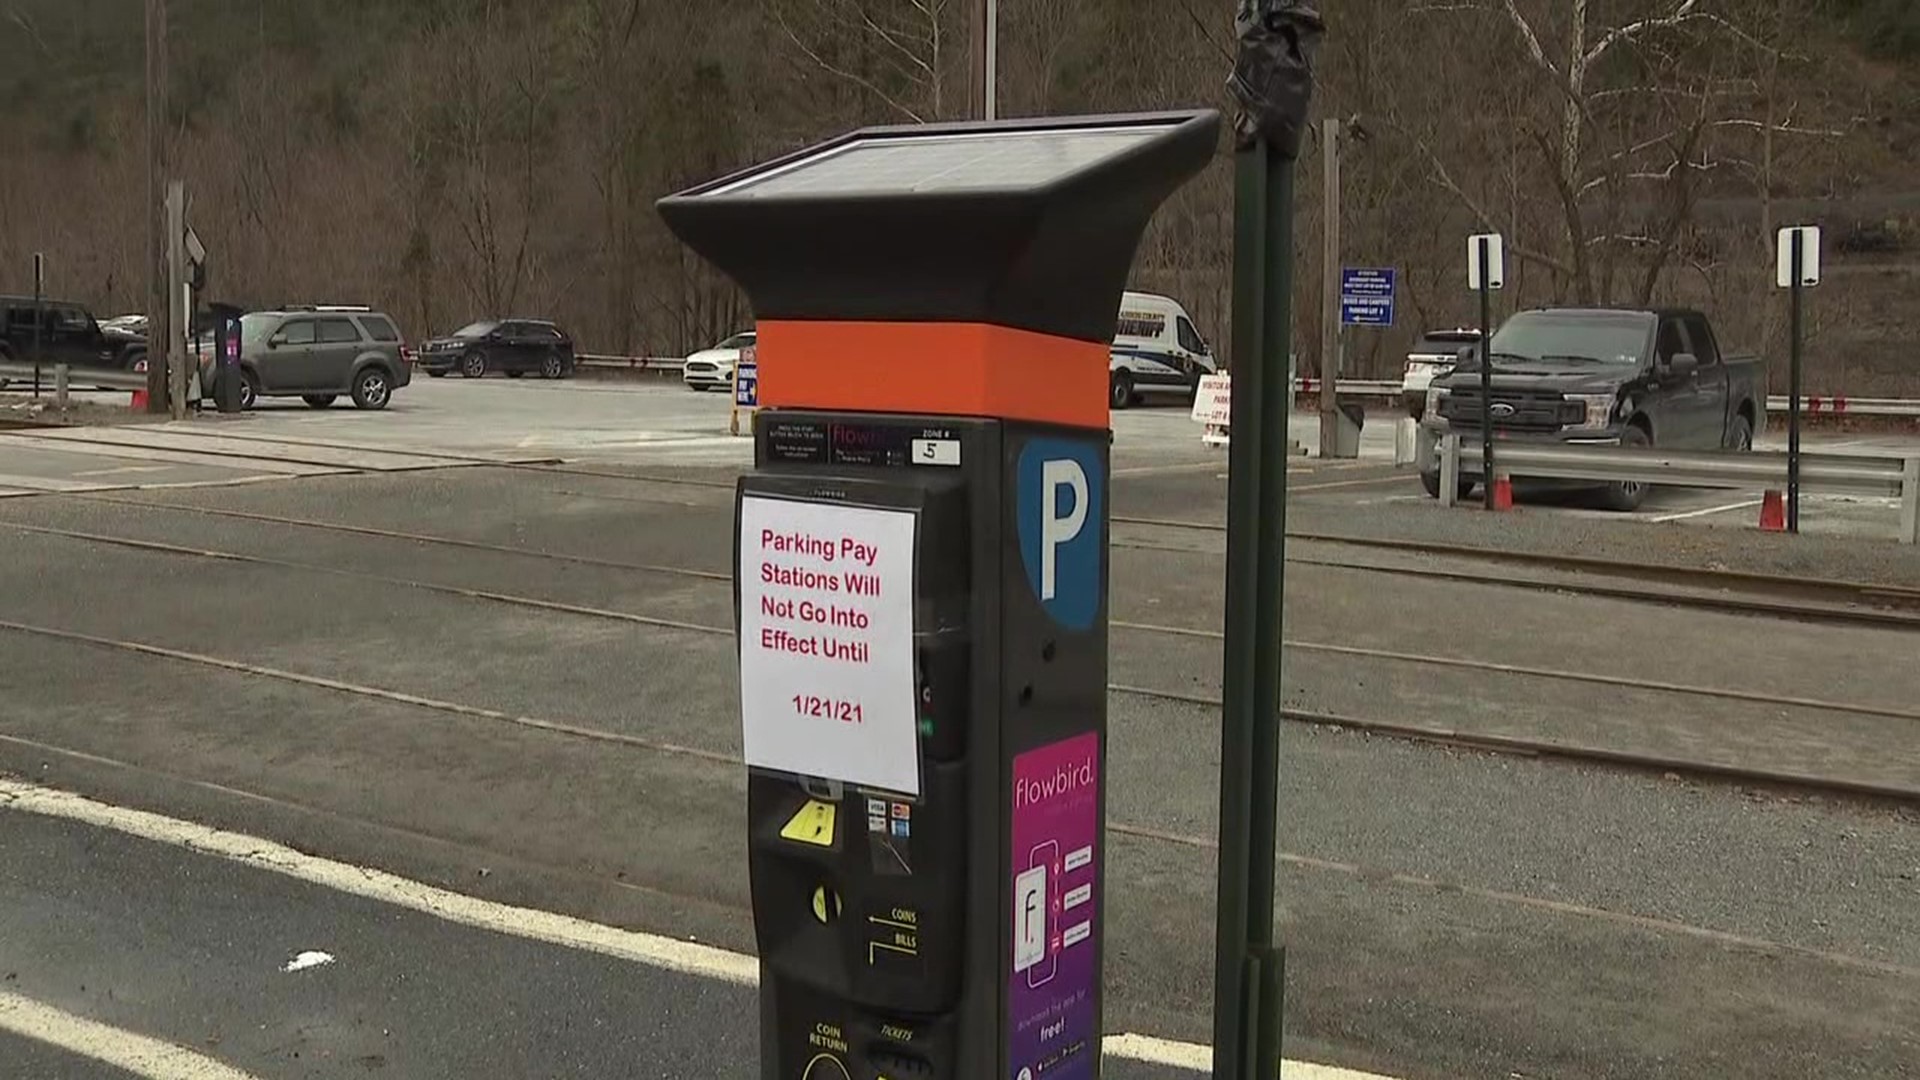 Some changes are coming to the way people pay to park in downtown Jim Thorpe. County-owned parking spots will now move to a pay-by-plate kiosk system.